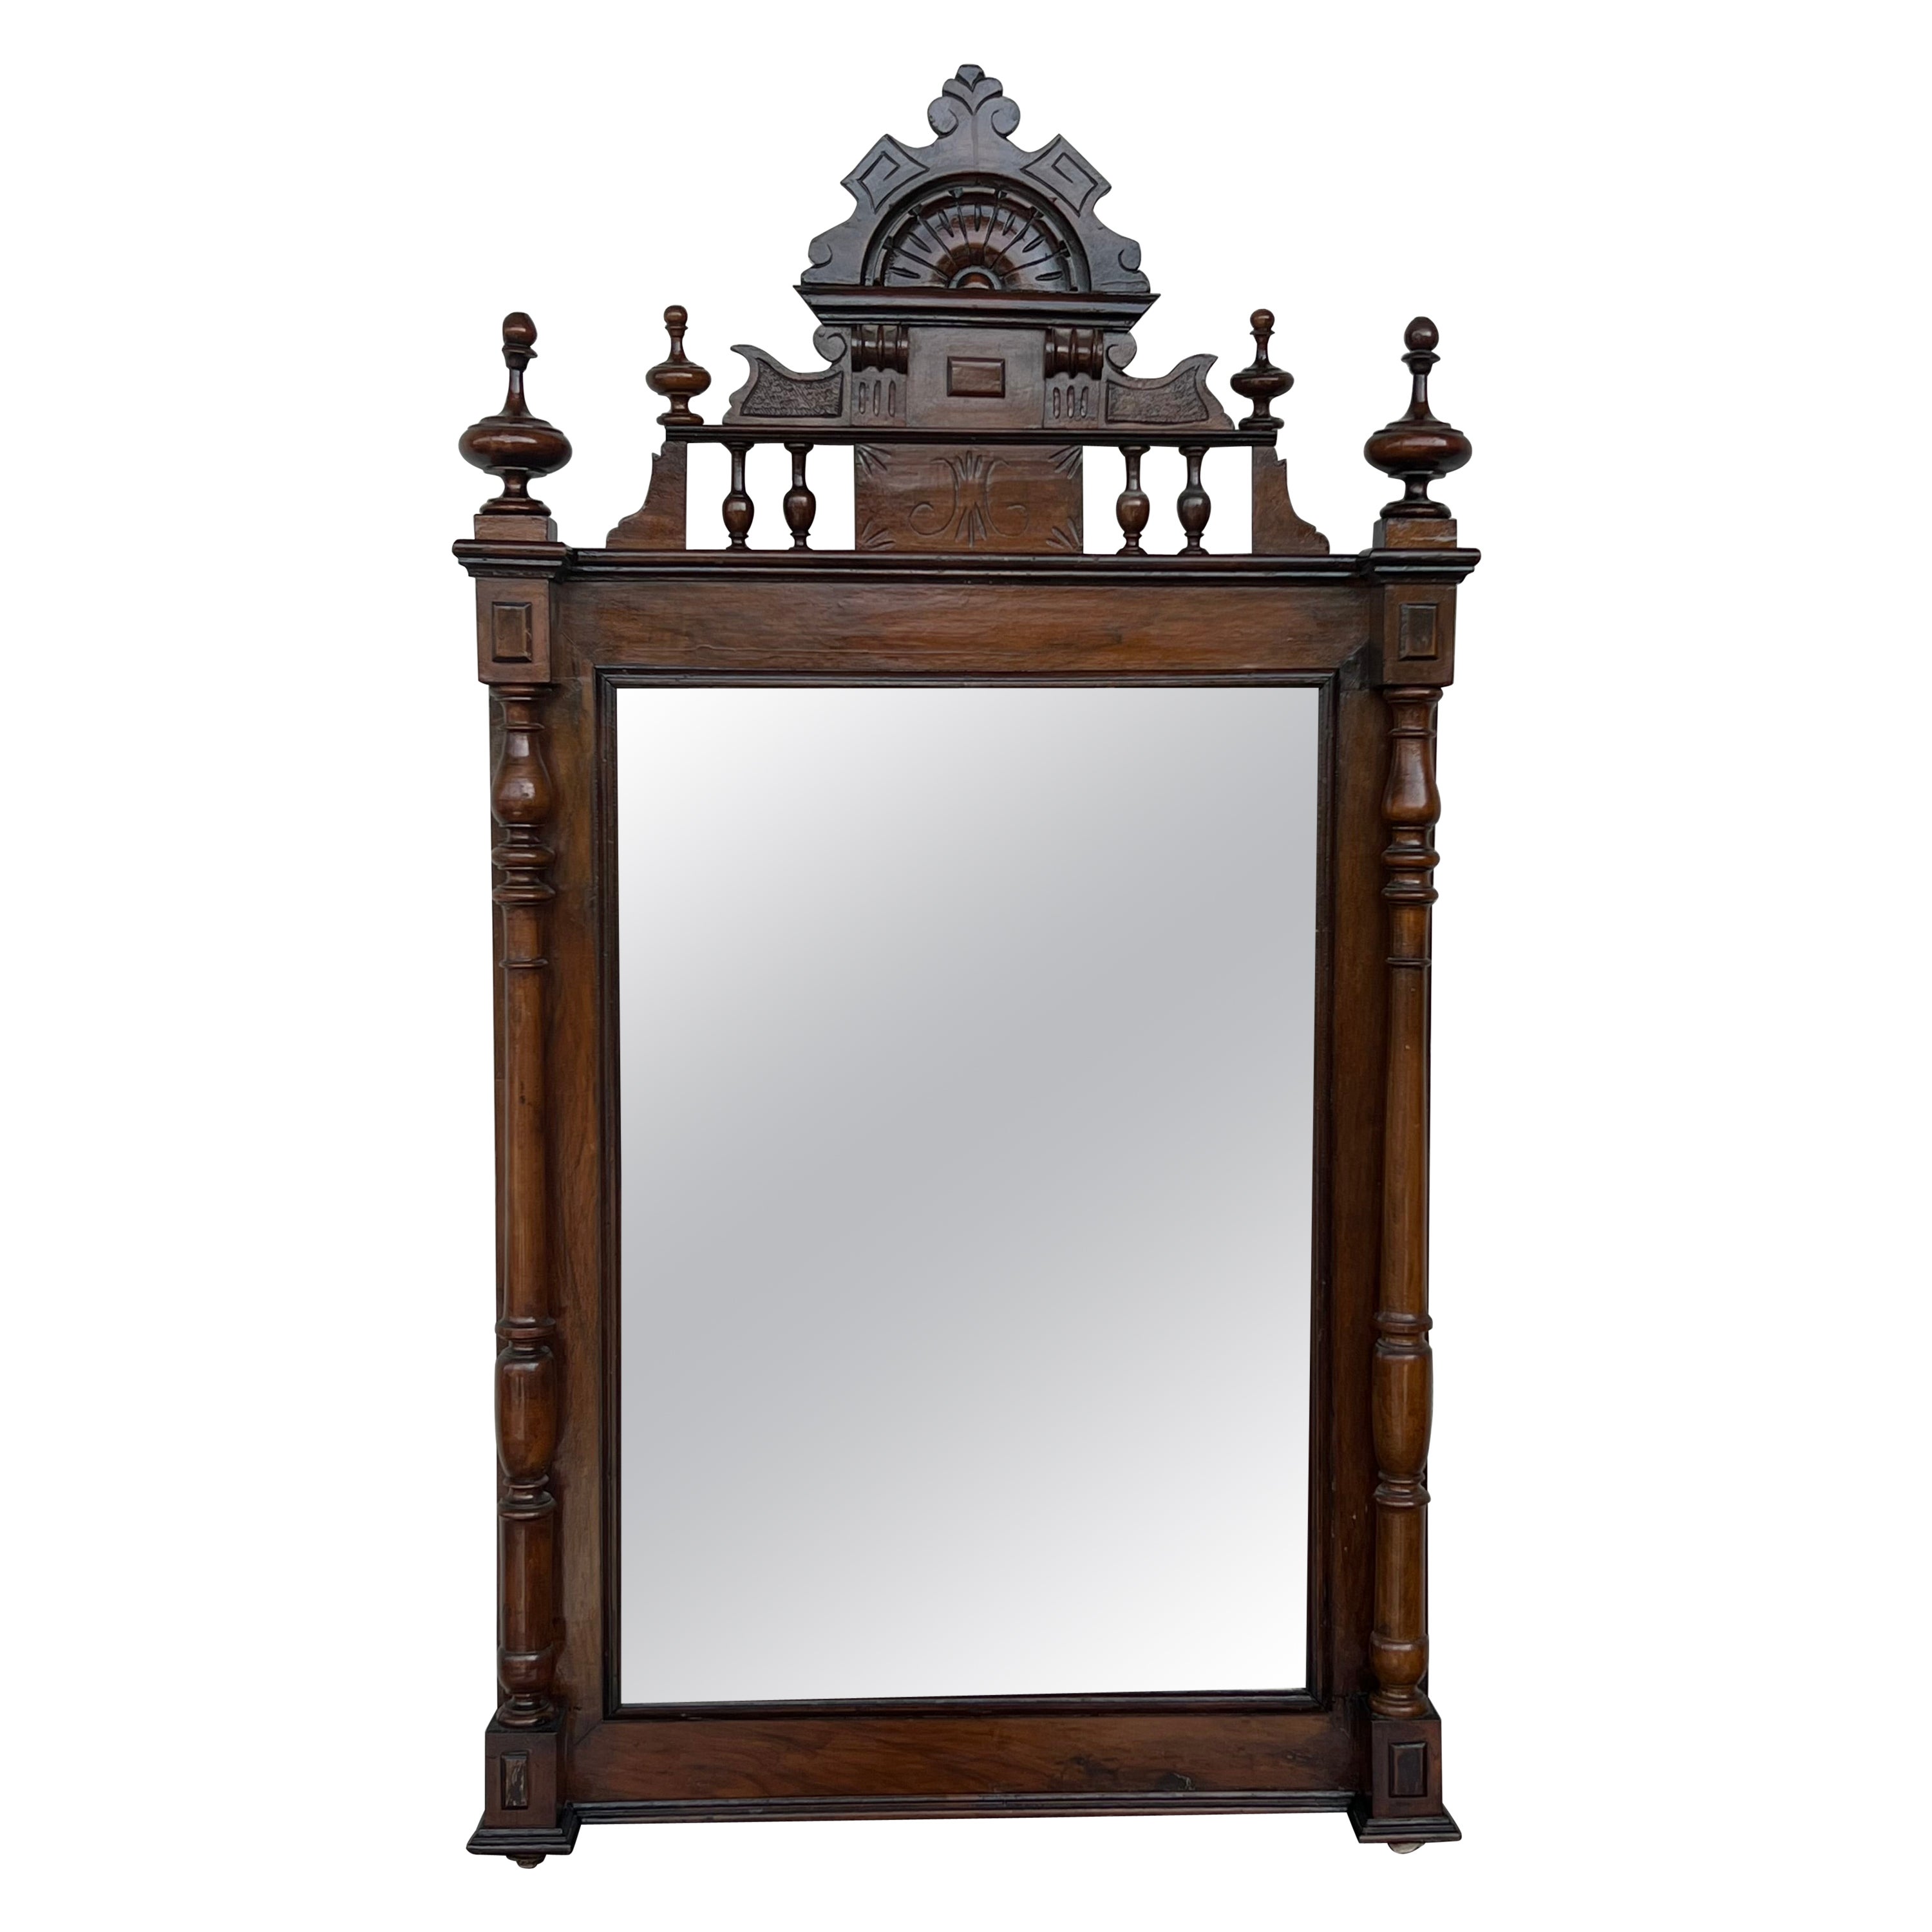 Early 20th French Ebonized Mirror with Turned Columns and High Carved Details For Sale